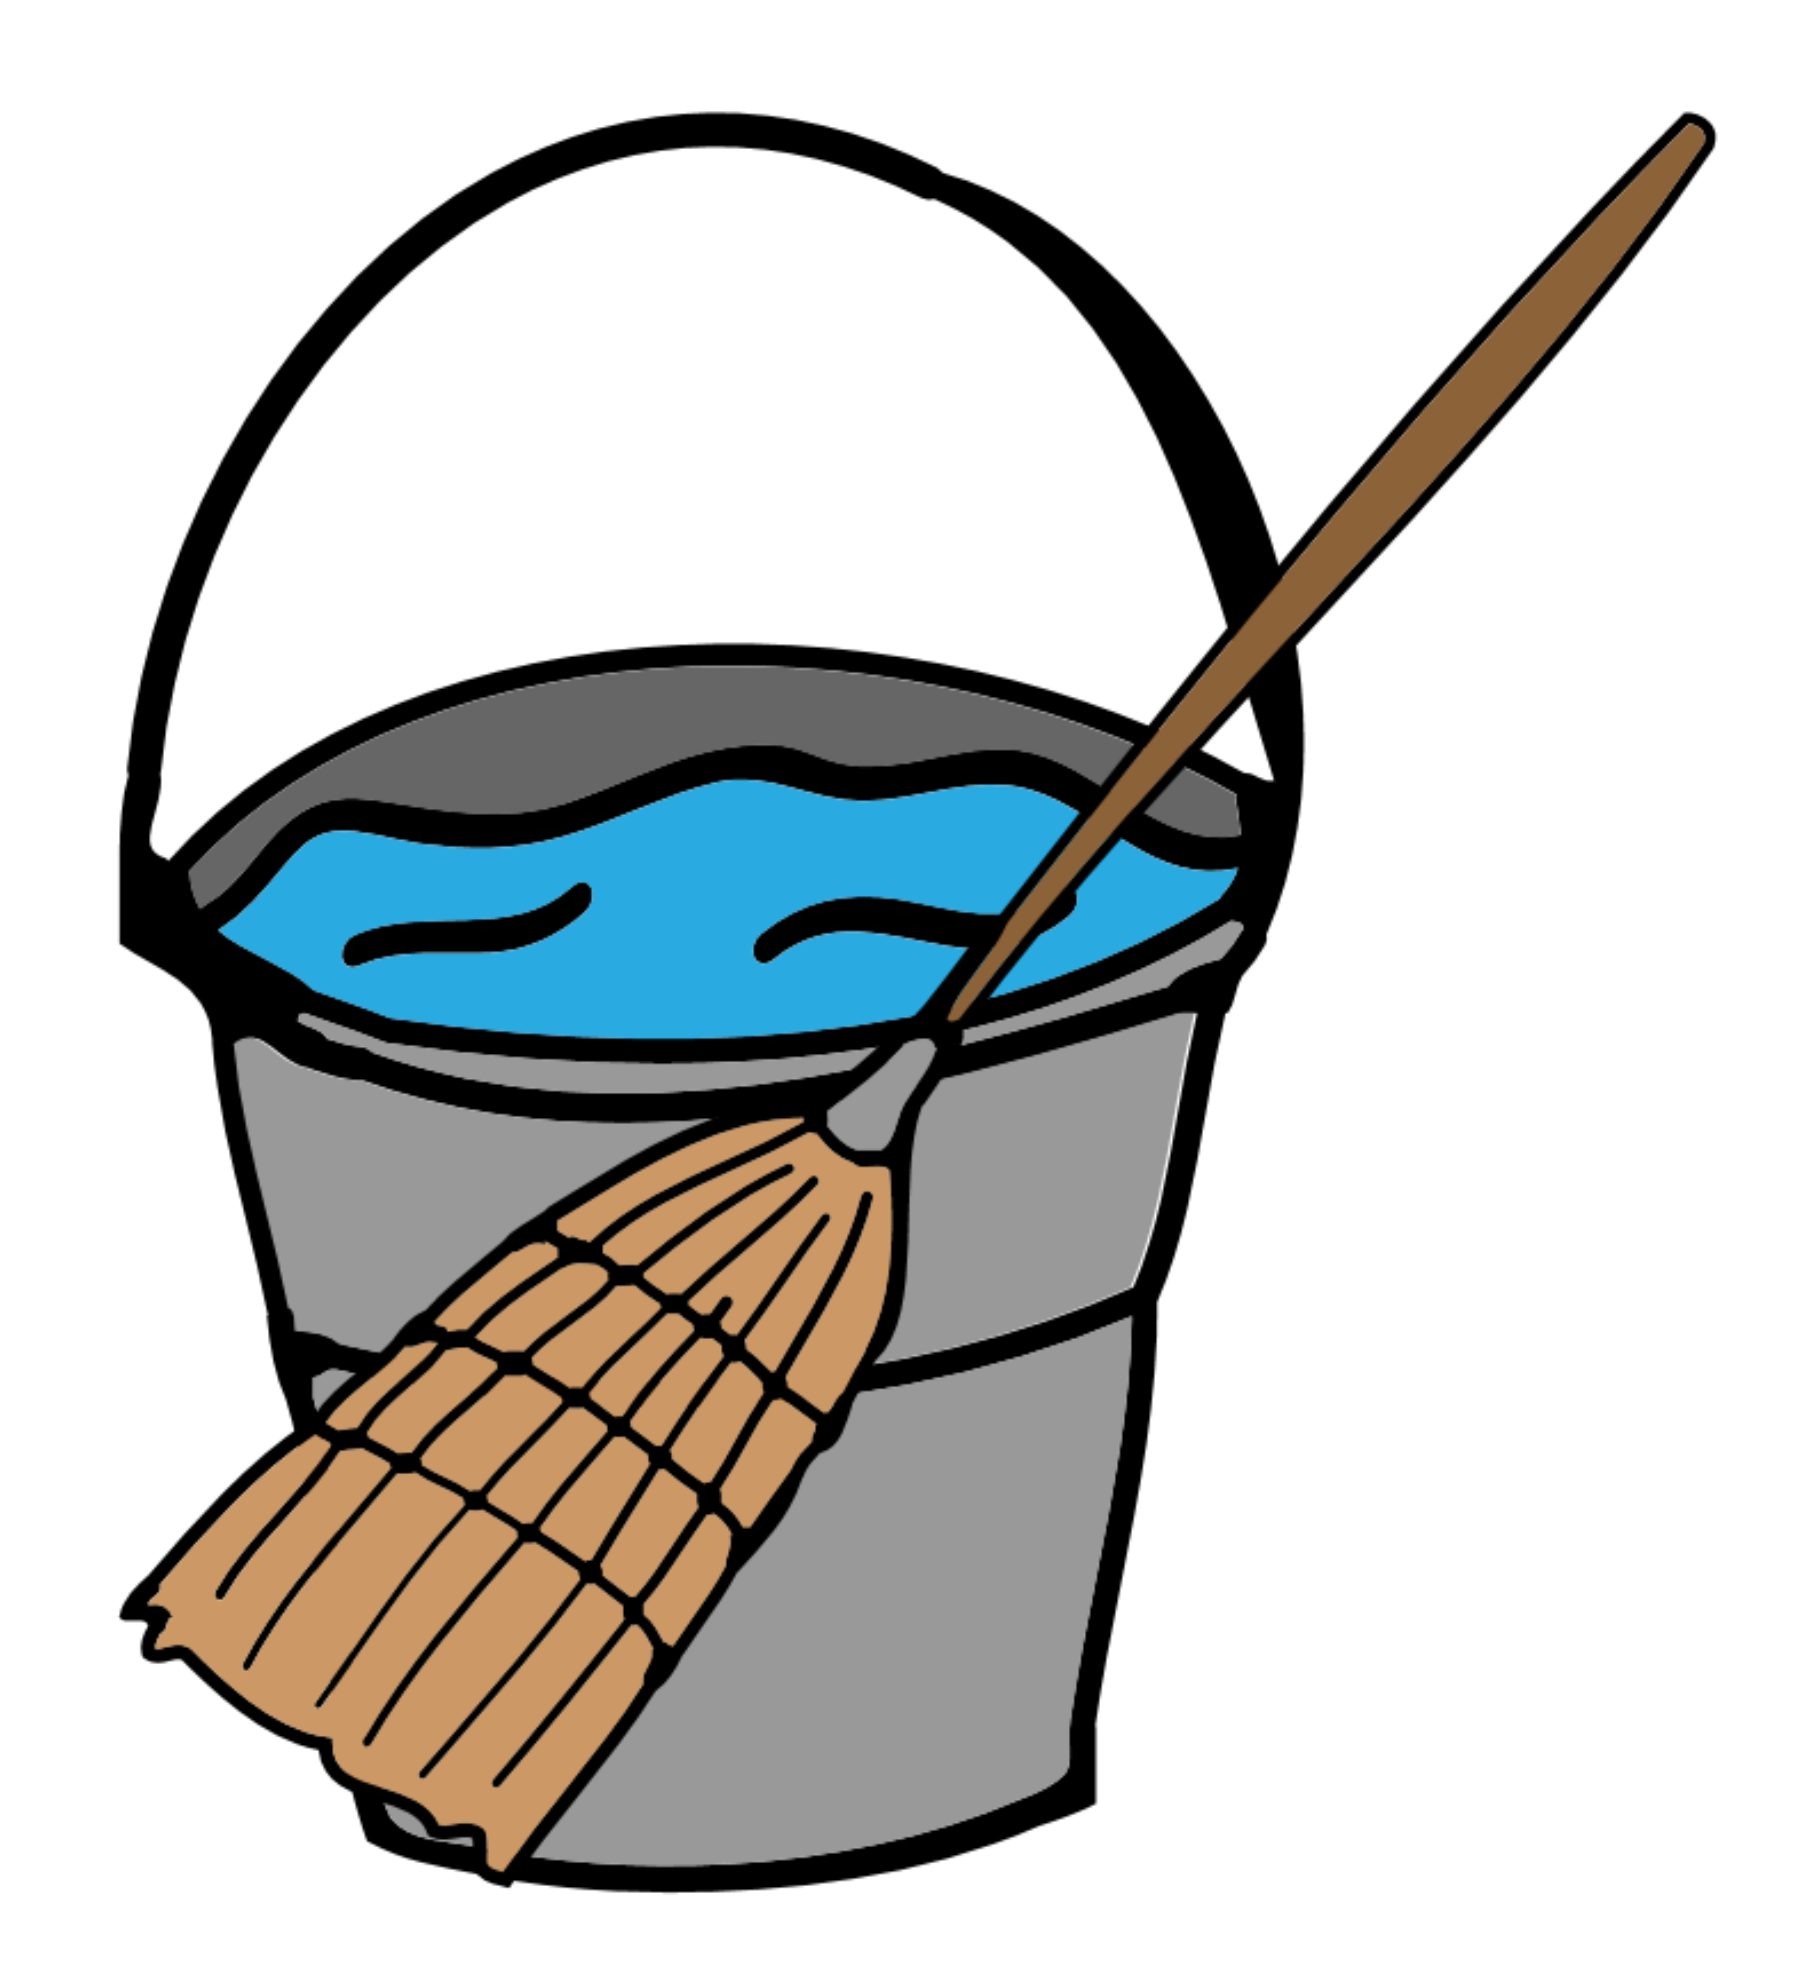 broom and pail